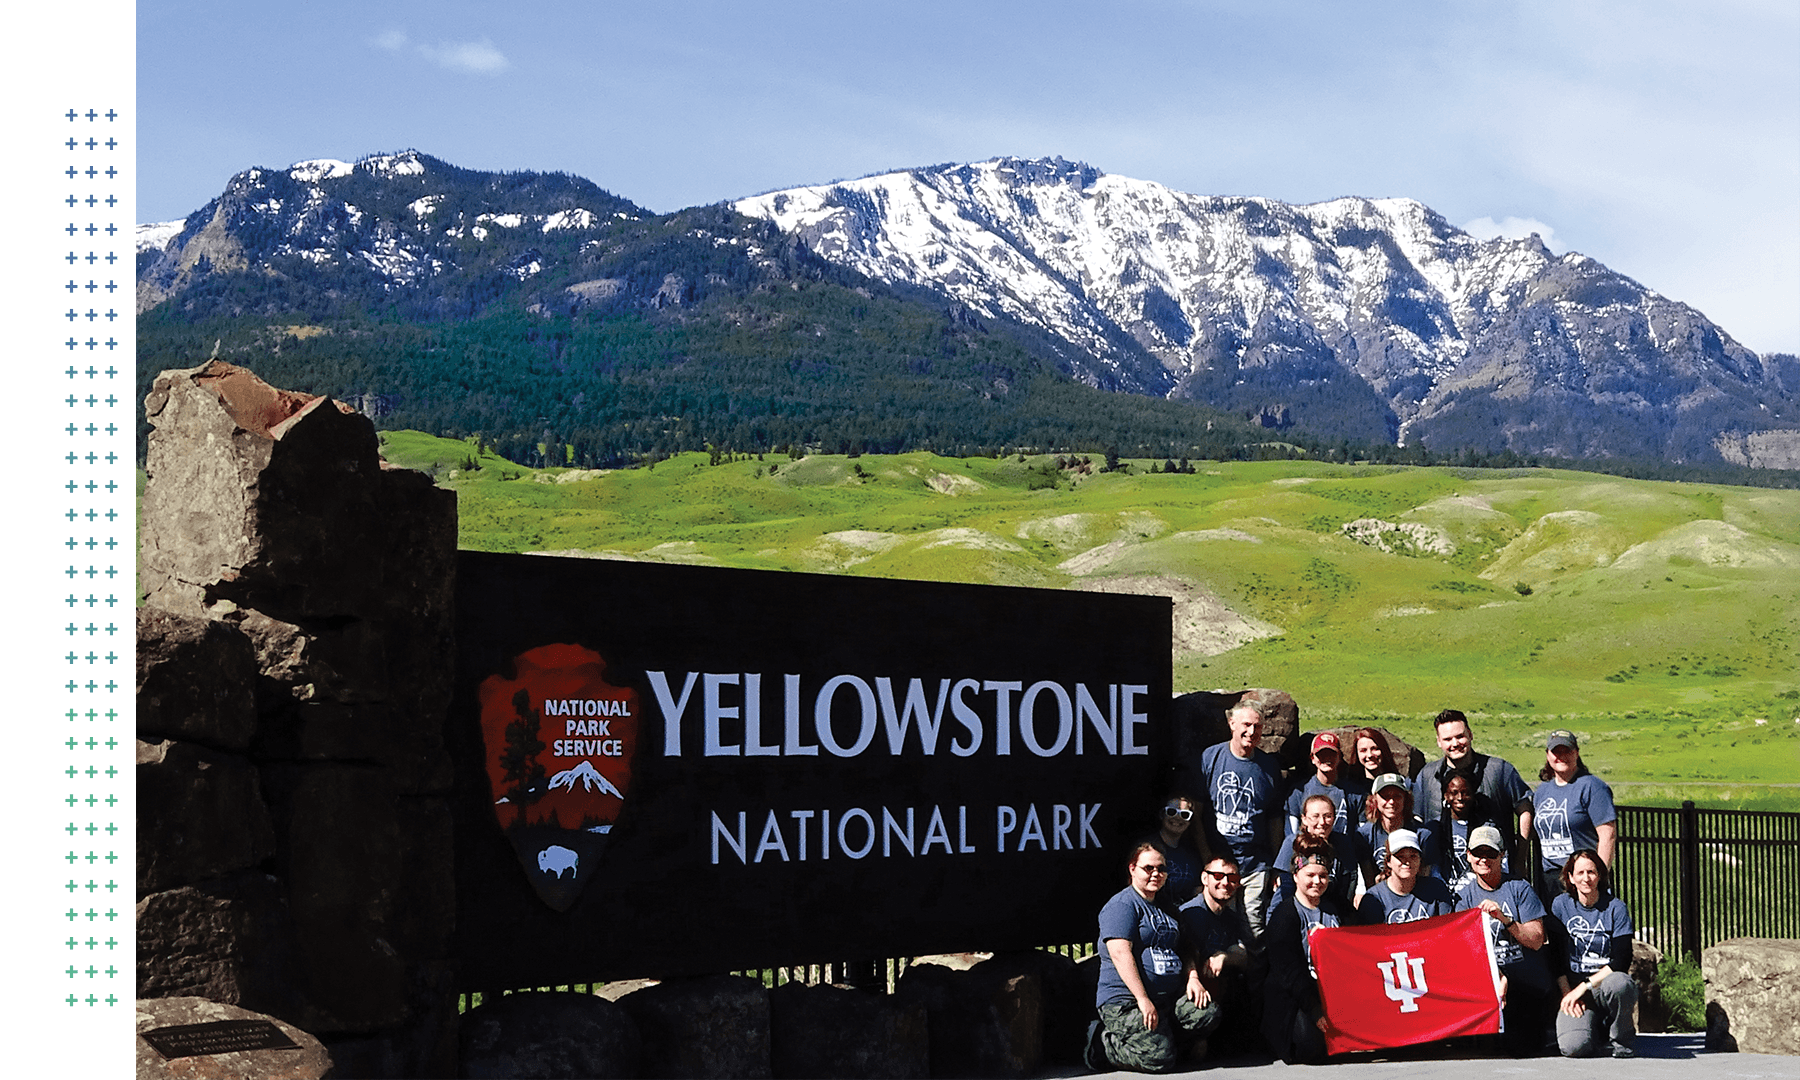 group of students posing with an IU flag next to a sign that reads Yellowstone National Park with snowcapped mountains in the background